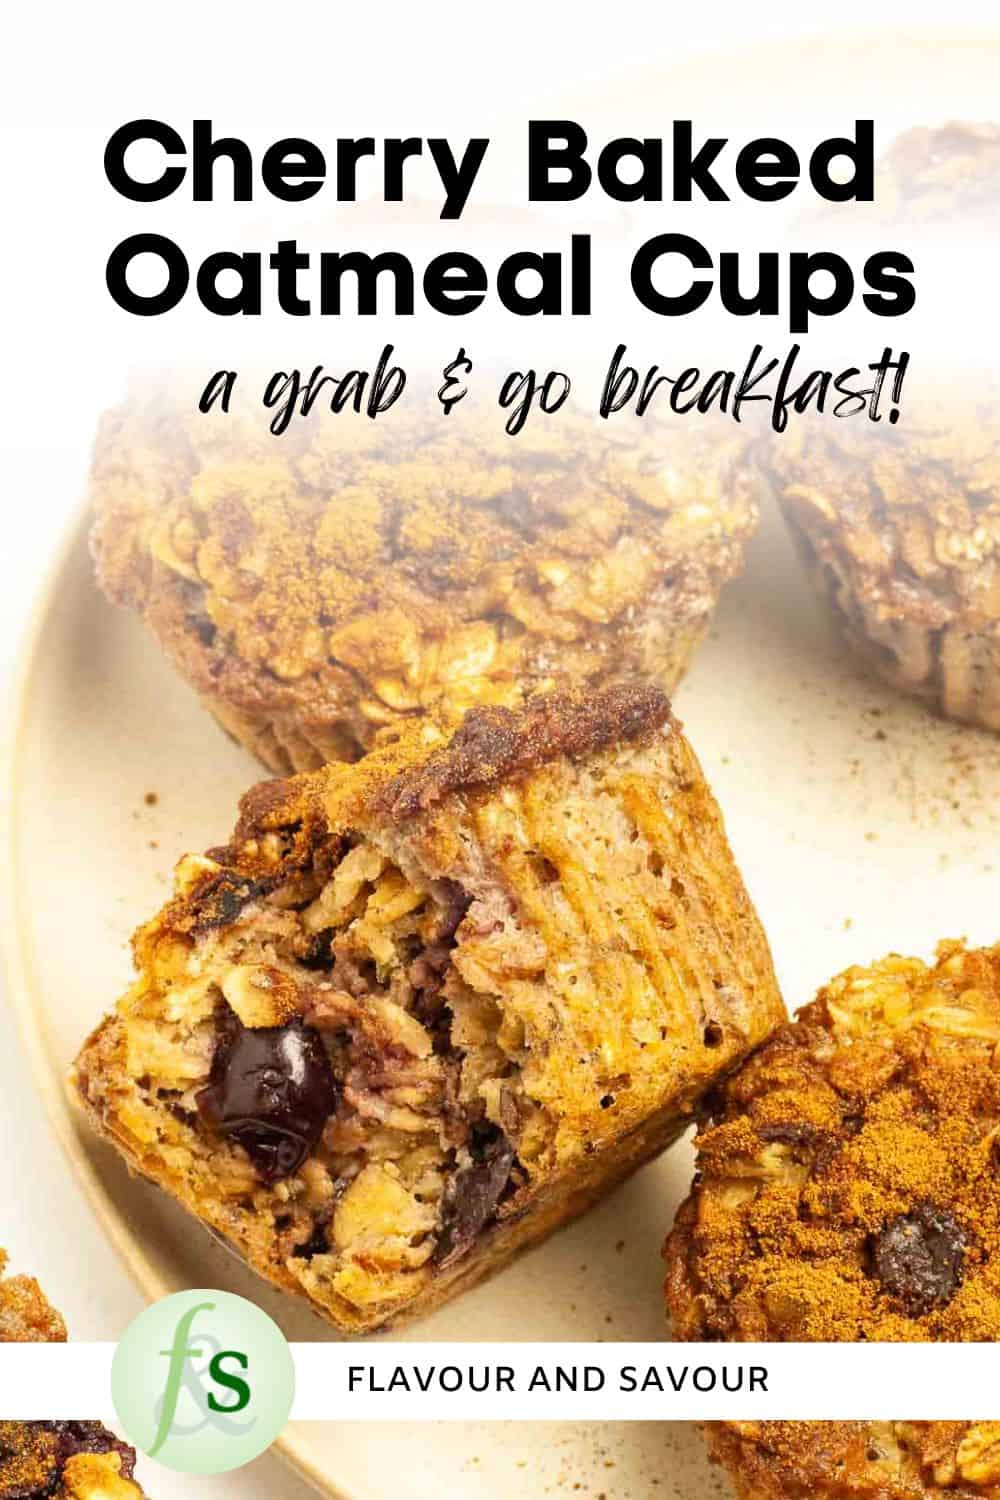 Image with text for cherry baked oatmeal cups with chia.